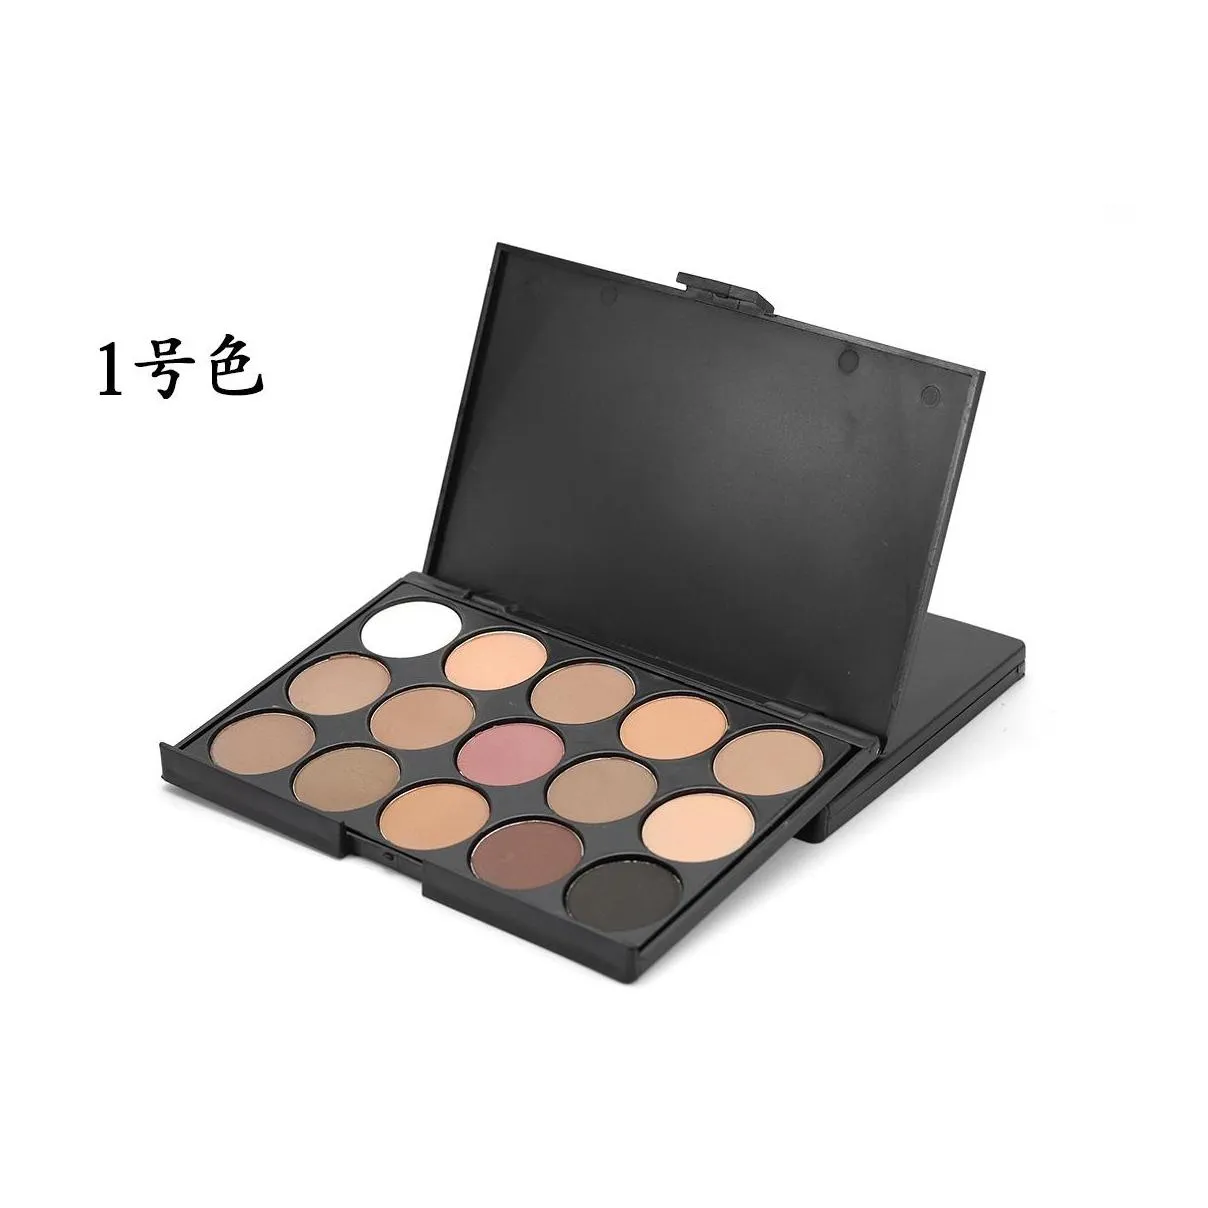 eye makeup look eyeshadow palette 15 colors matte and shimmer eyeshadow nude earth color powder make up eyes shadow